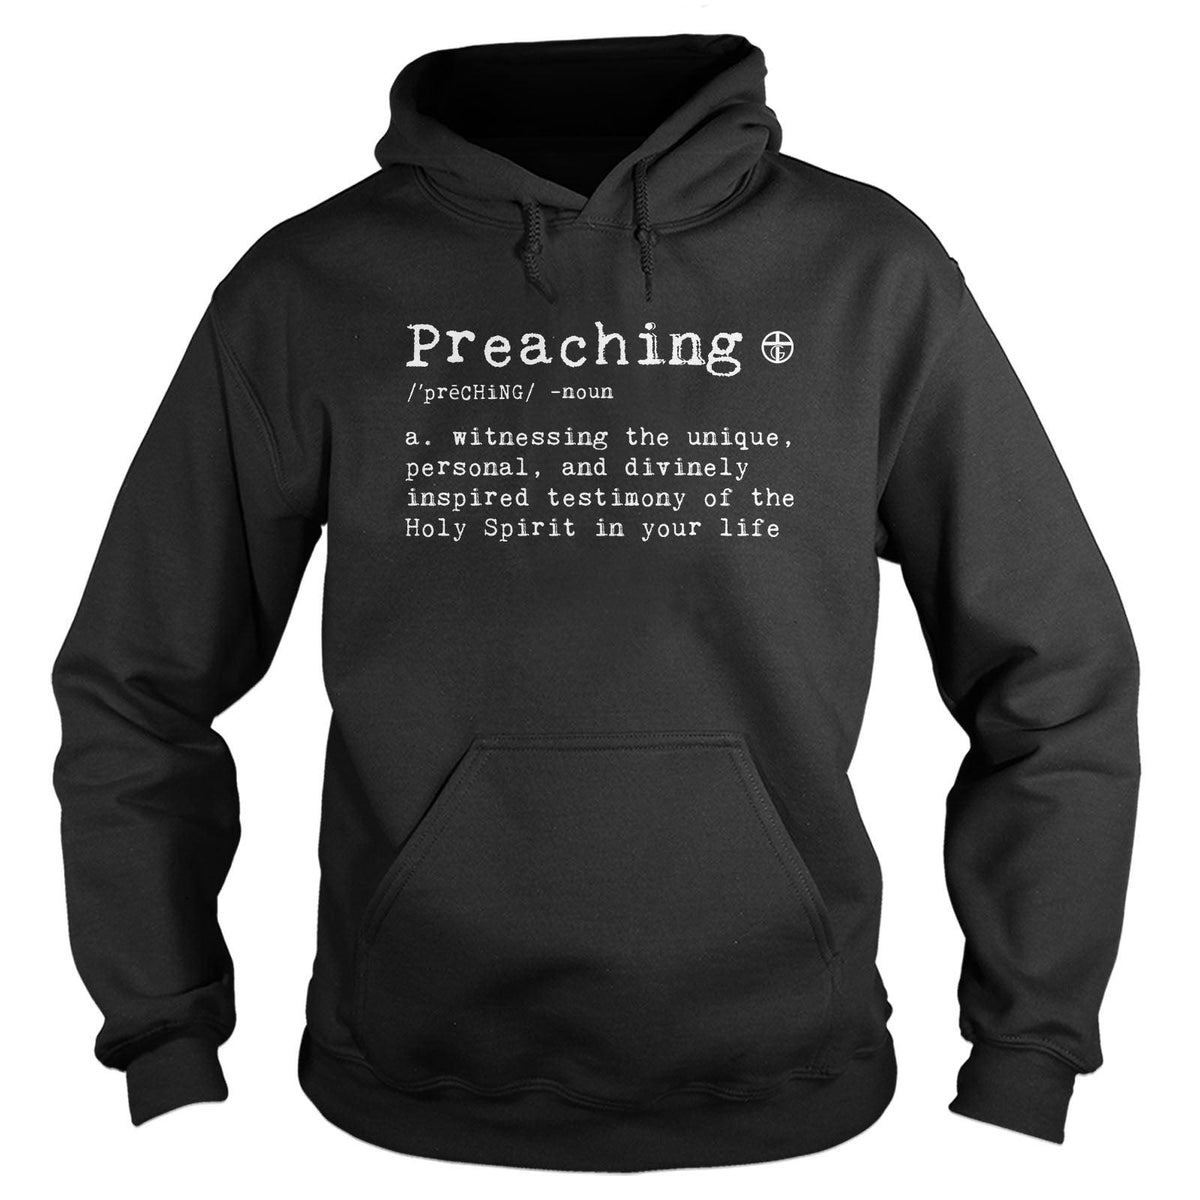 God’s Definition of Preaching - Our True God